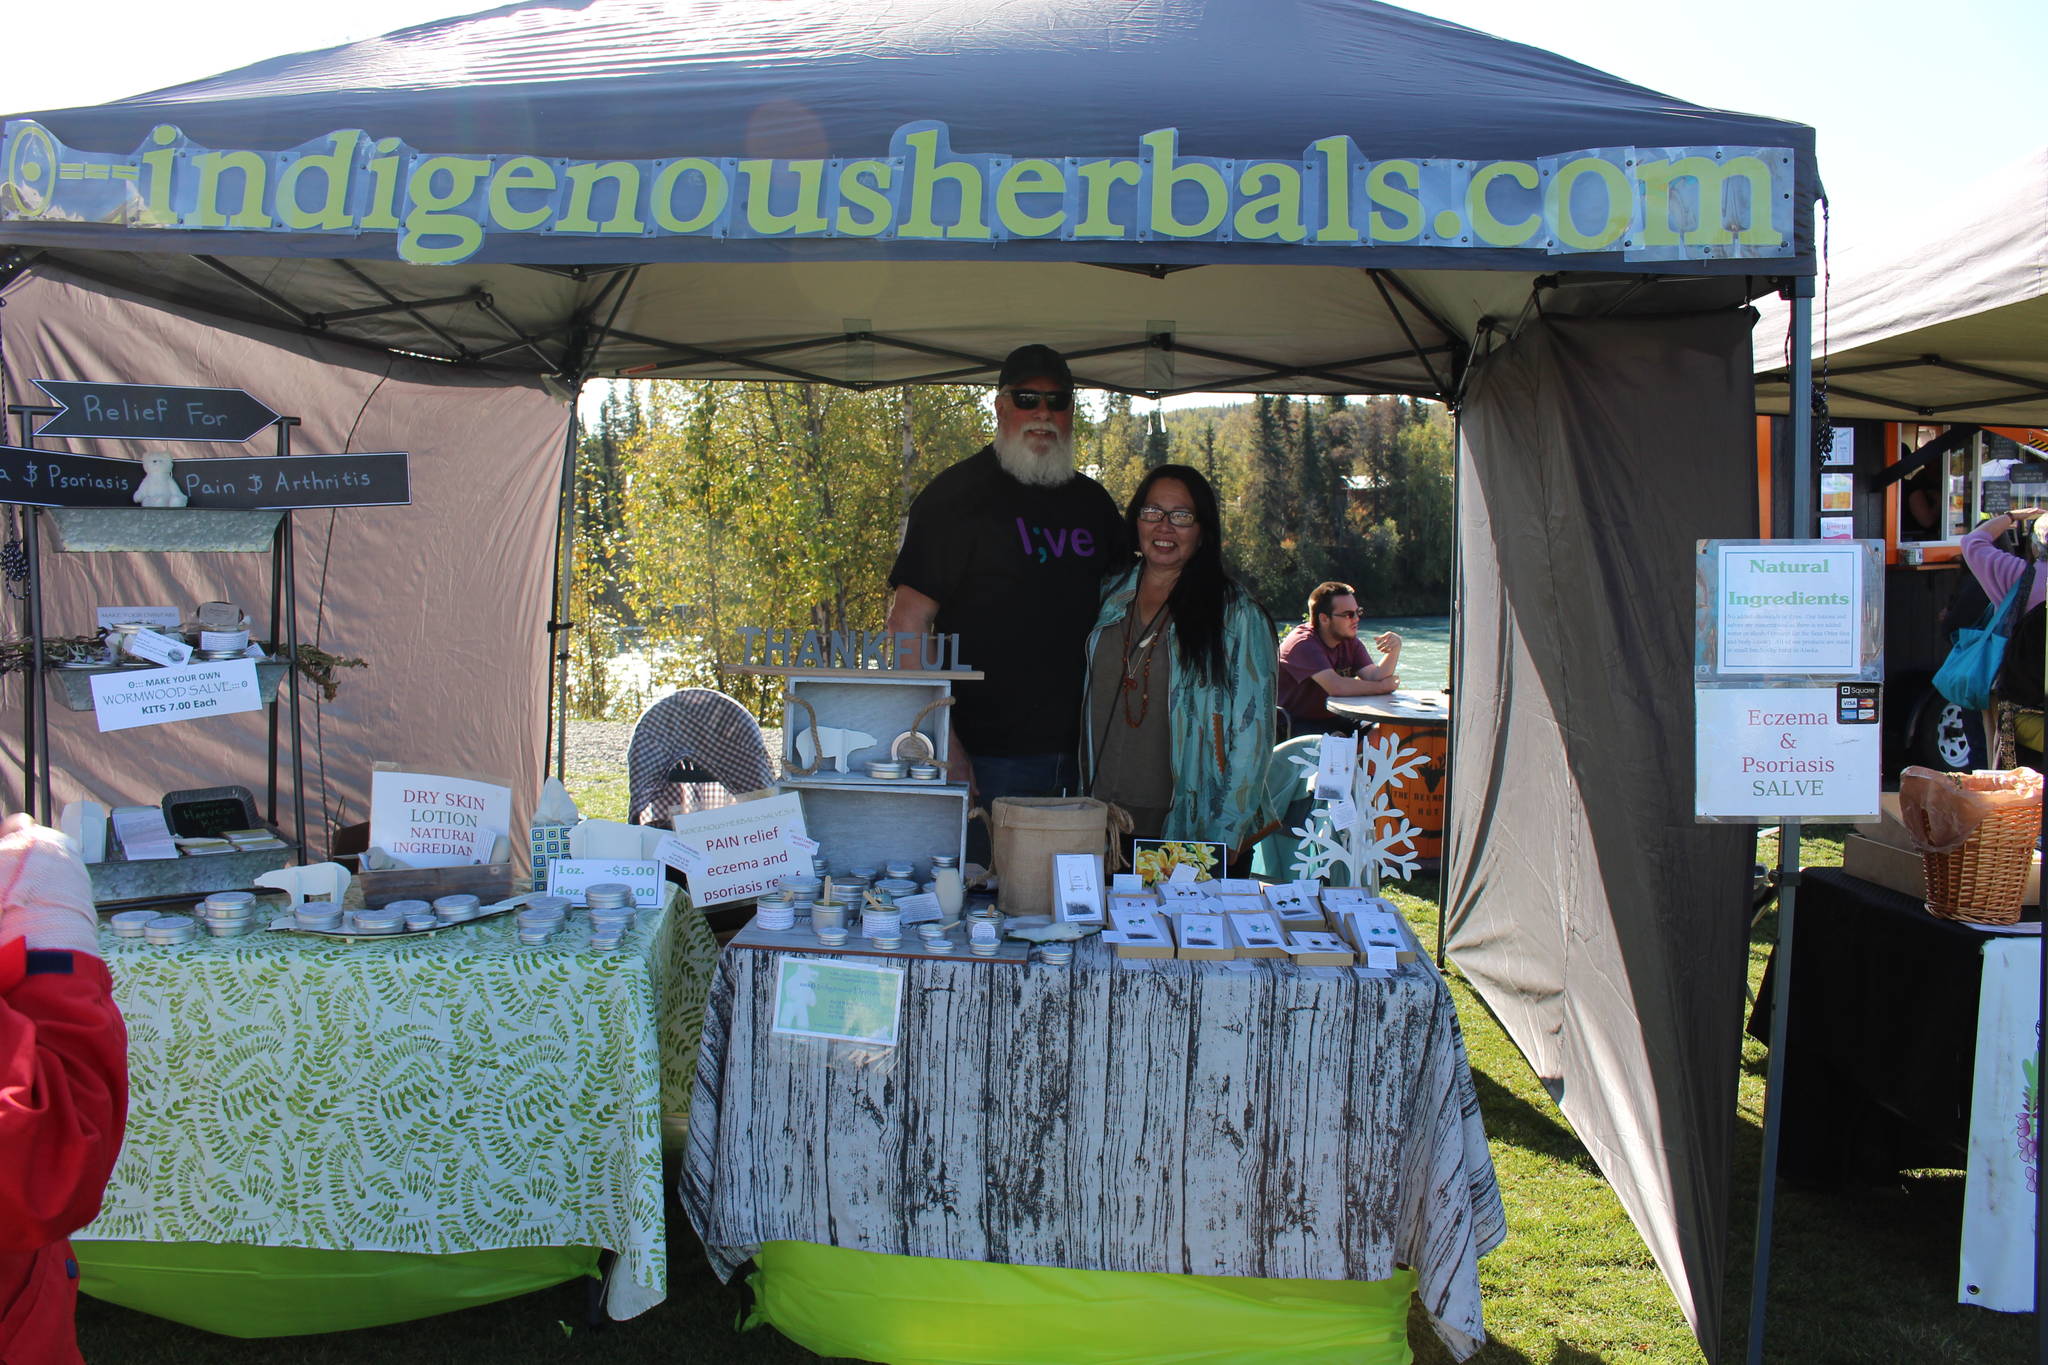 Michael and Tia Holley are seen here at their stand for Indigenous Herbals at the Harvest Moon Local Food Festival at Soldotna Creek Park on Sept. 14, 2019. (Photo by Brian Mazurek/Peninsula Clarion)